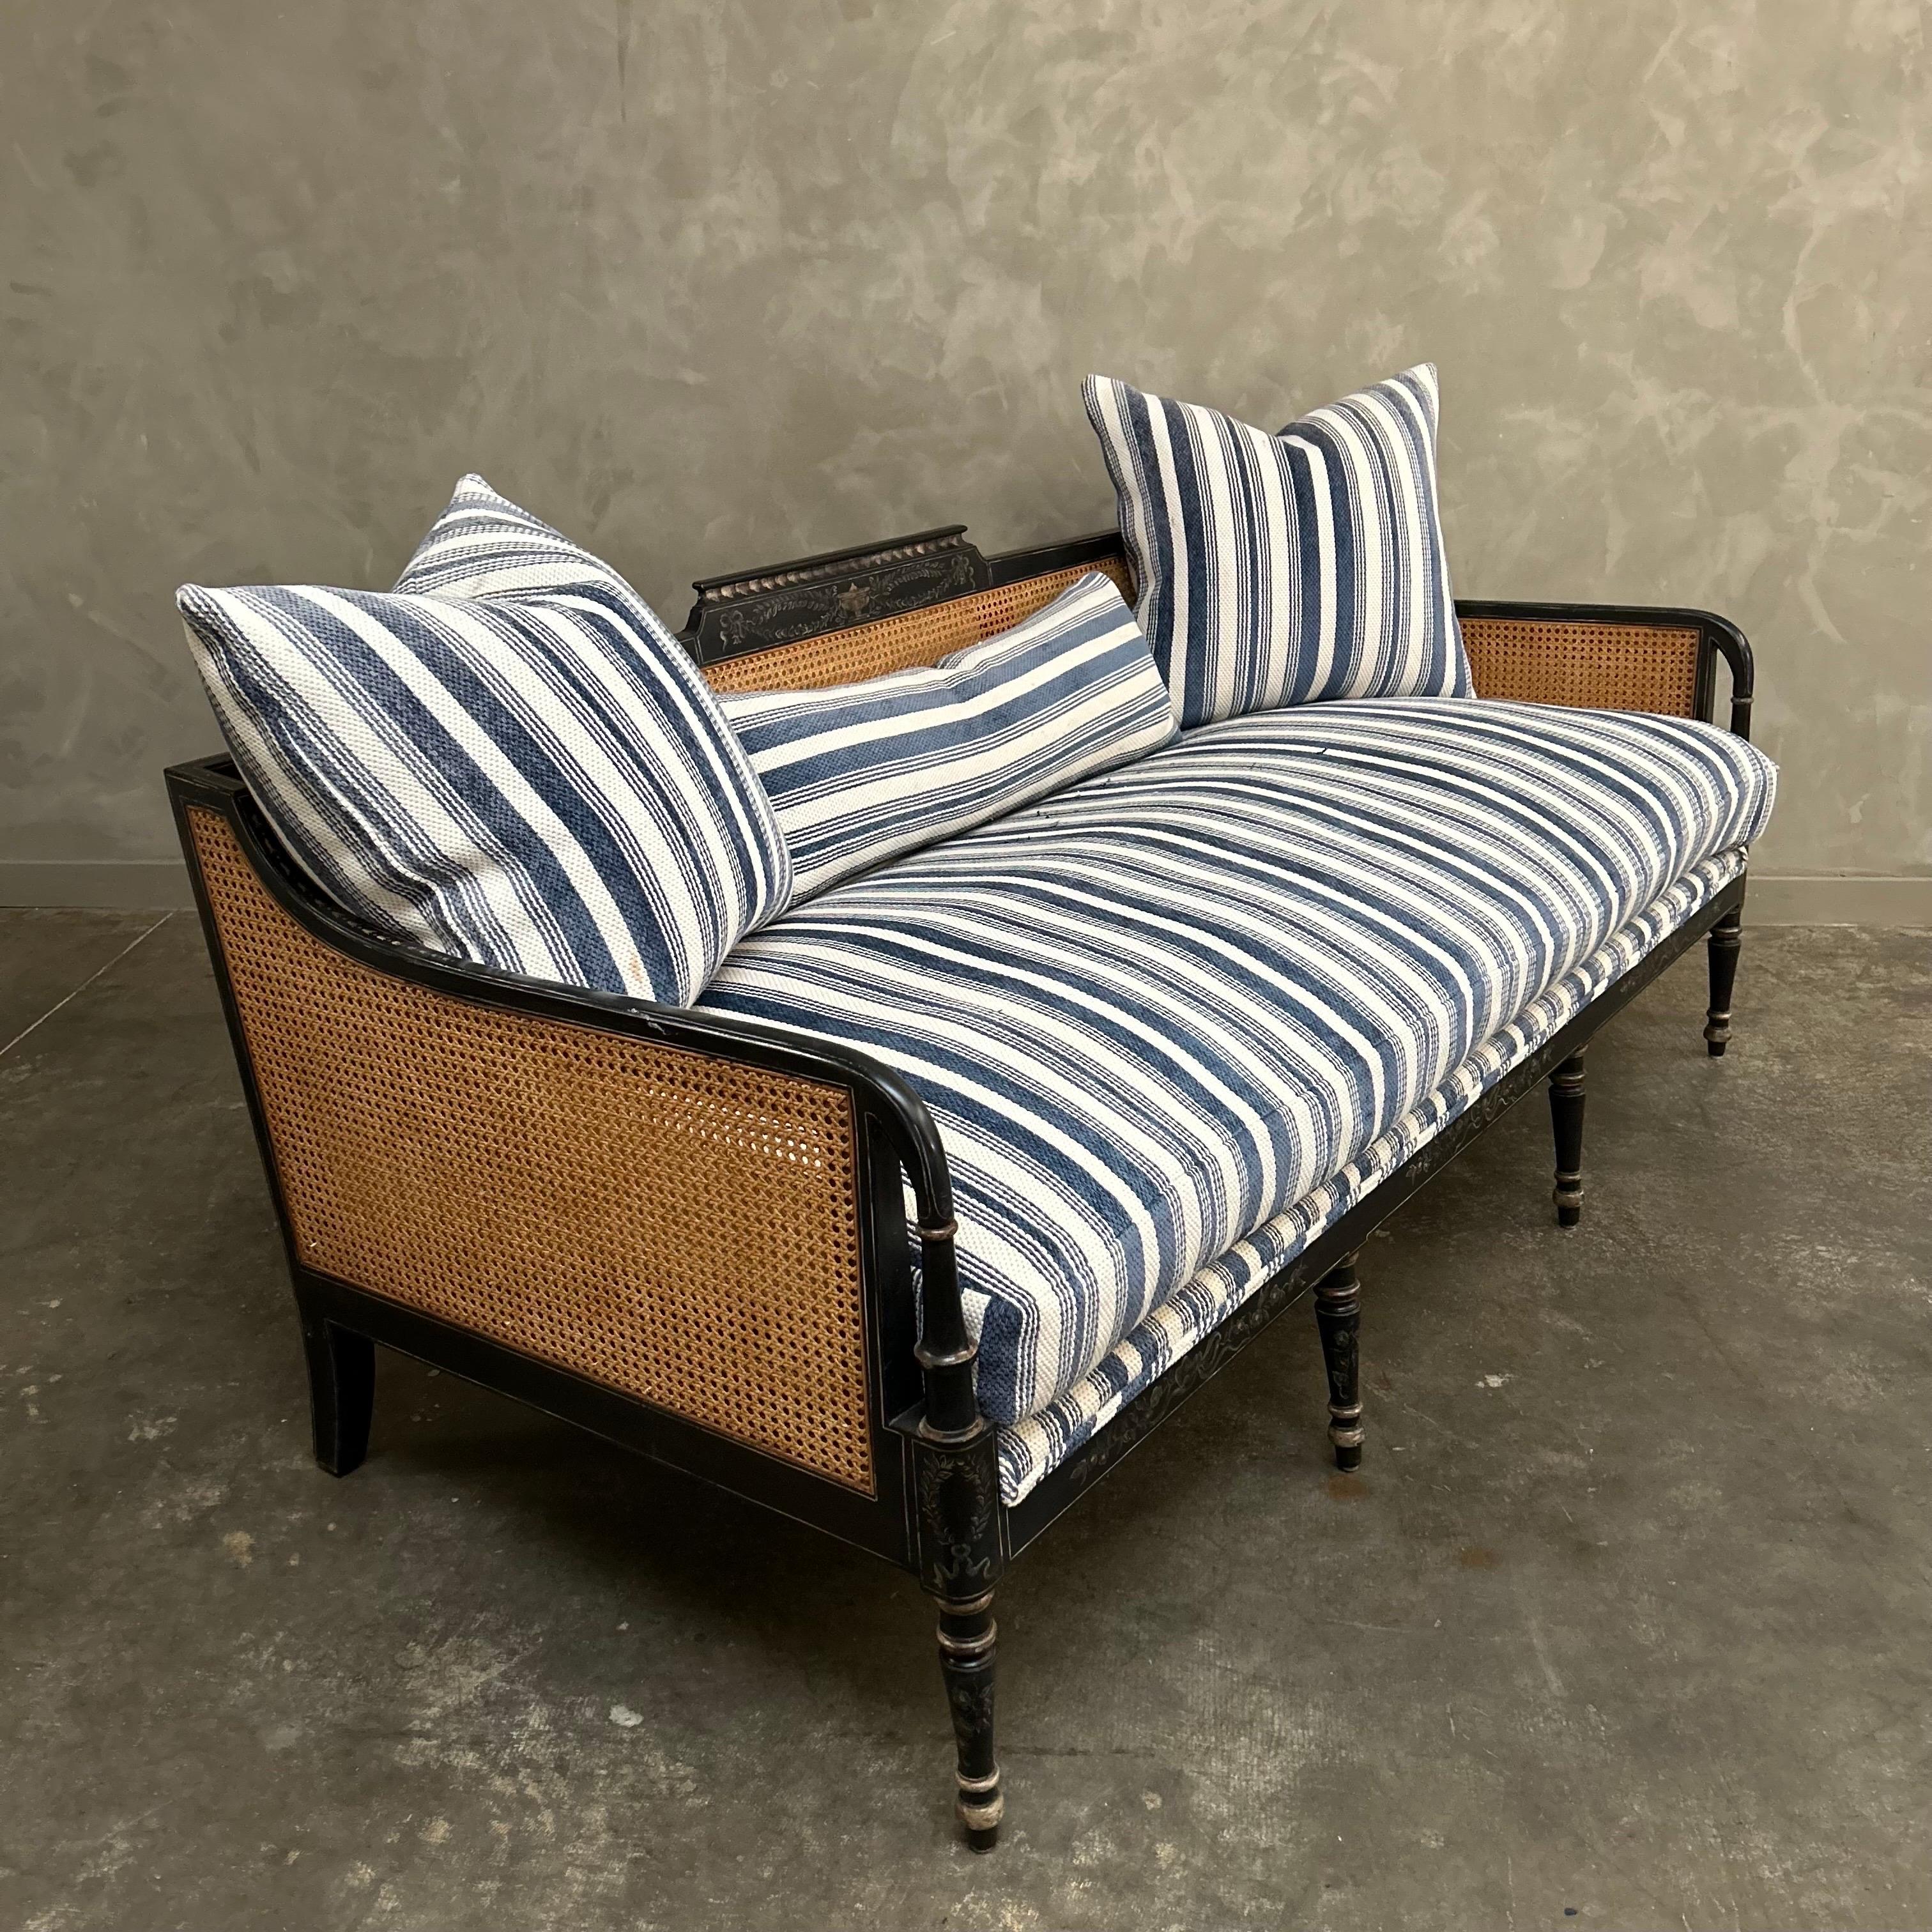 Black Painted cane daybed with hand painted details.
Cane is in good condition with an upholstered decking.
Blue ticking is in good condition, there are some spots of wear, no stains or major issues present. Can be reupholstered in COM or any of our